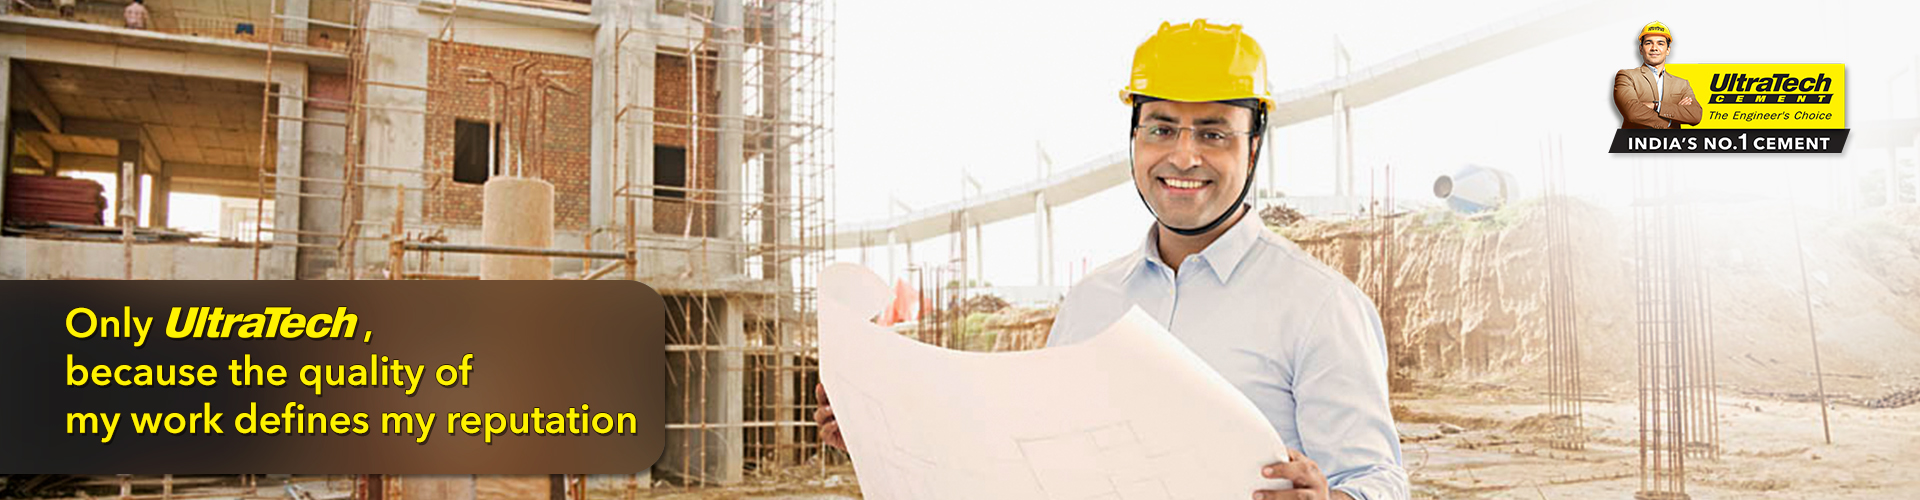 Structural and Architectural Engineering - UltraTech